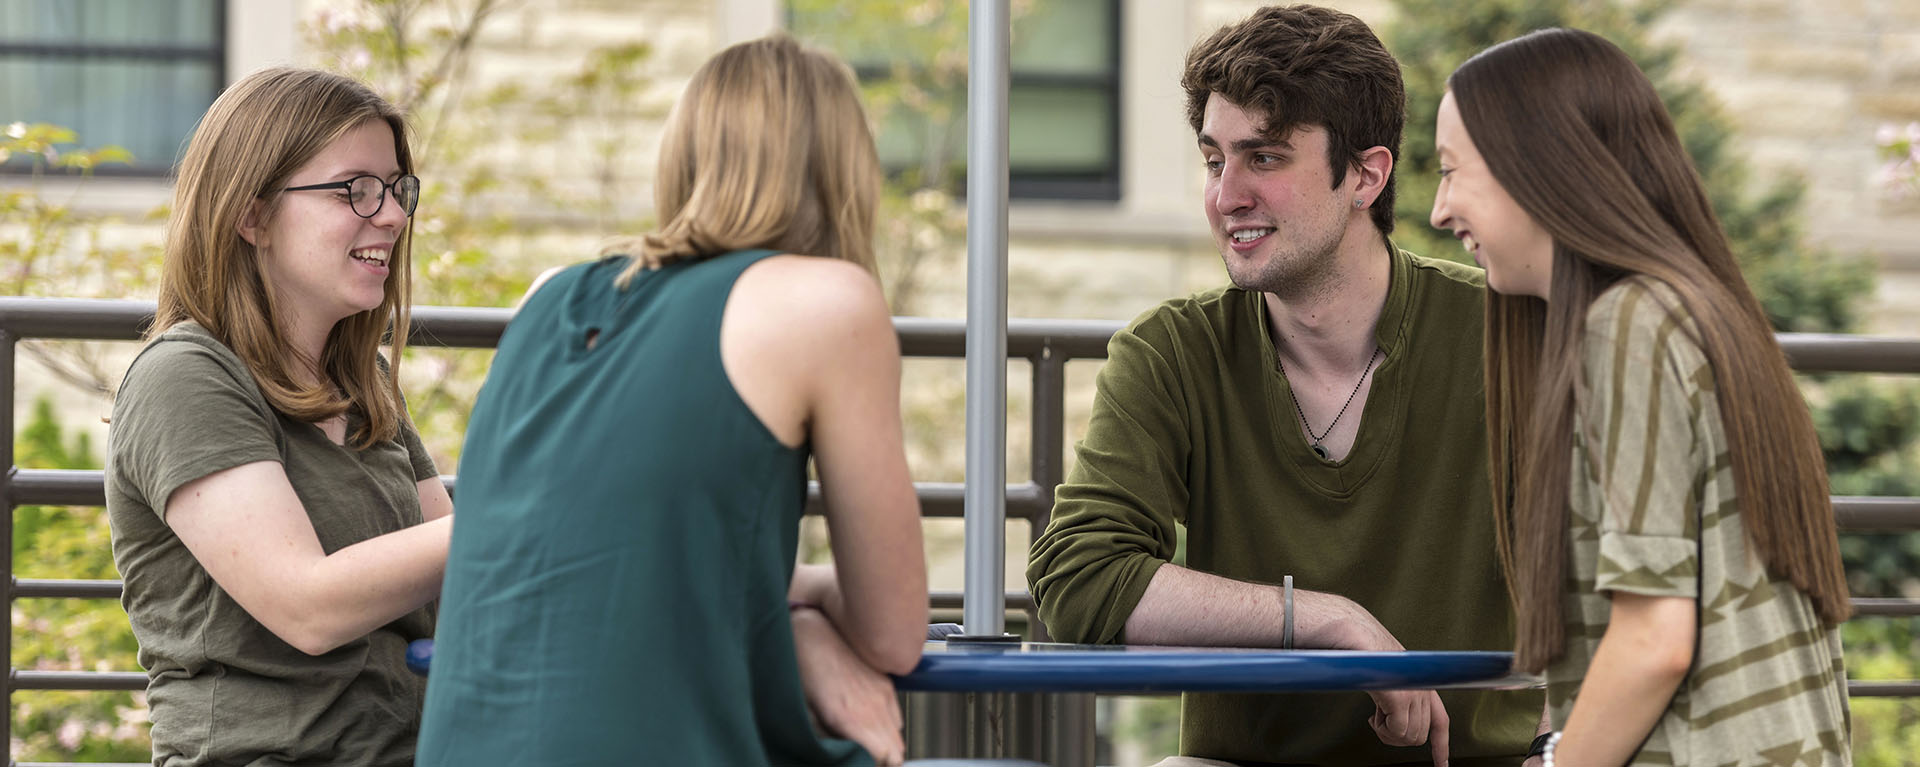 Washburn students converse on the patio of the Memorial Union.